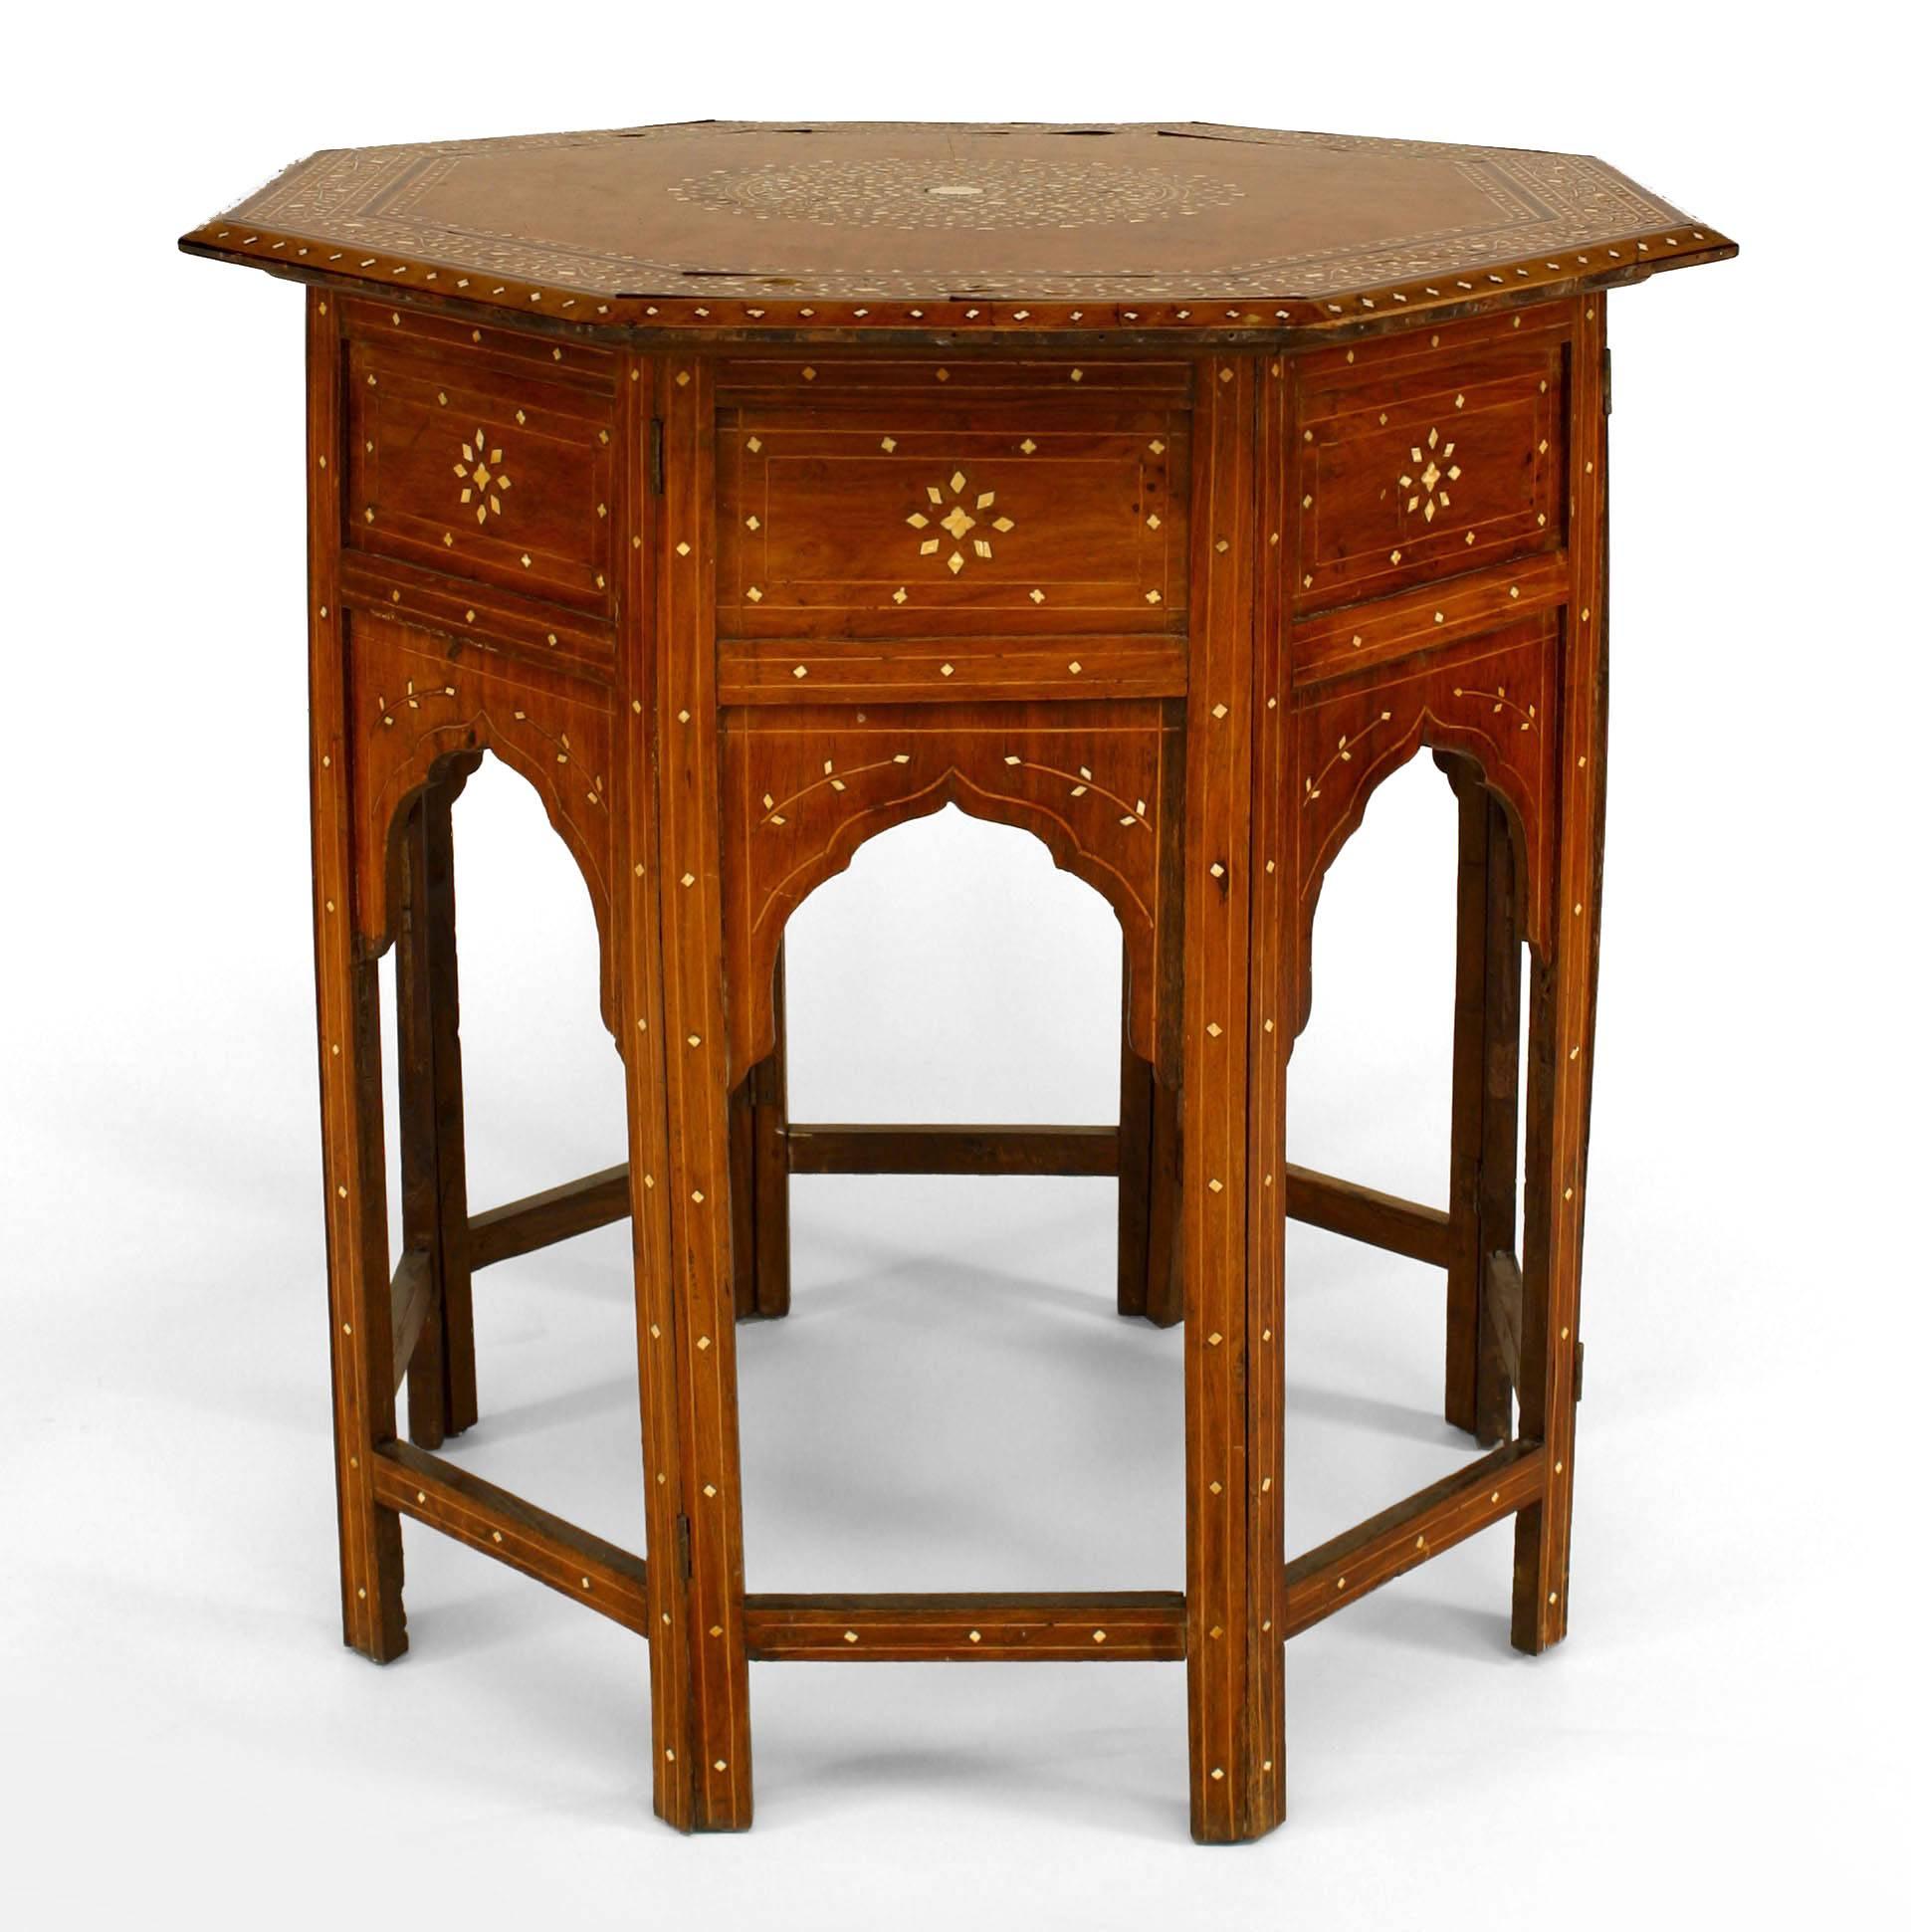 Nineteenth century Moorish style teak and bone inlaid octagonal taboret end table with open arch design panels at the base and circle and floral design top.